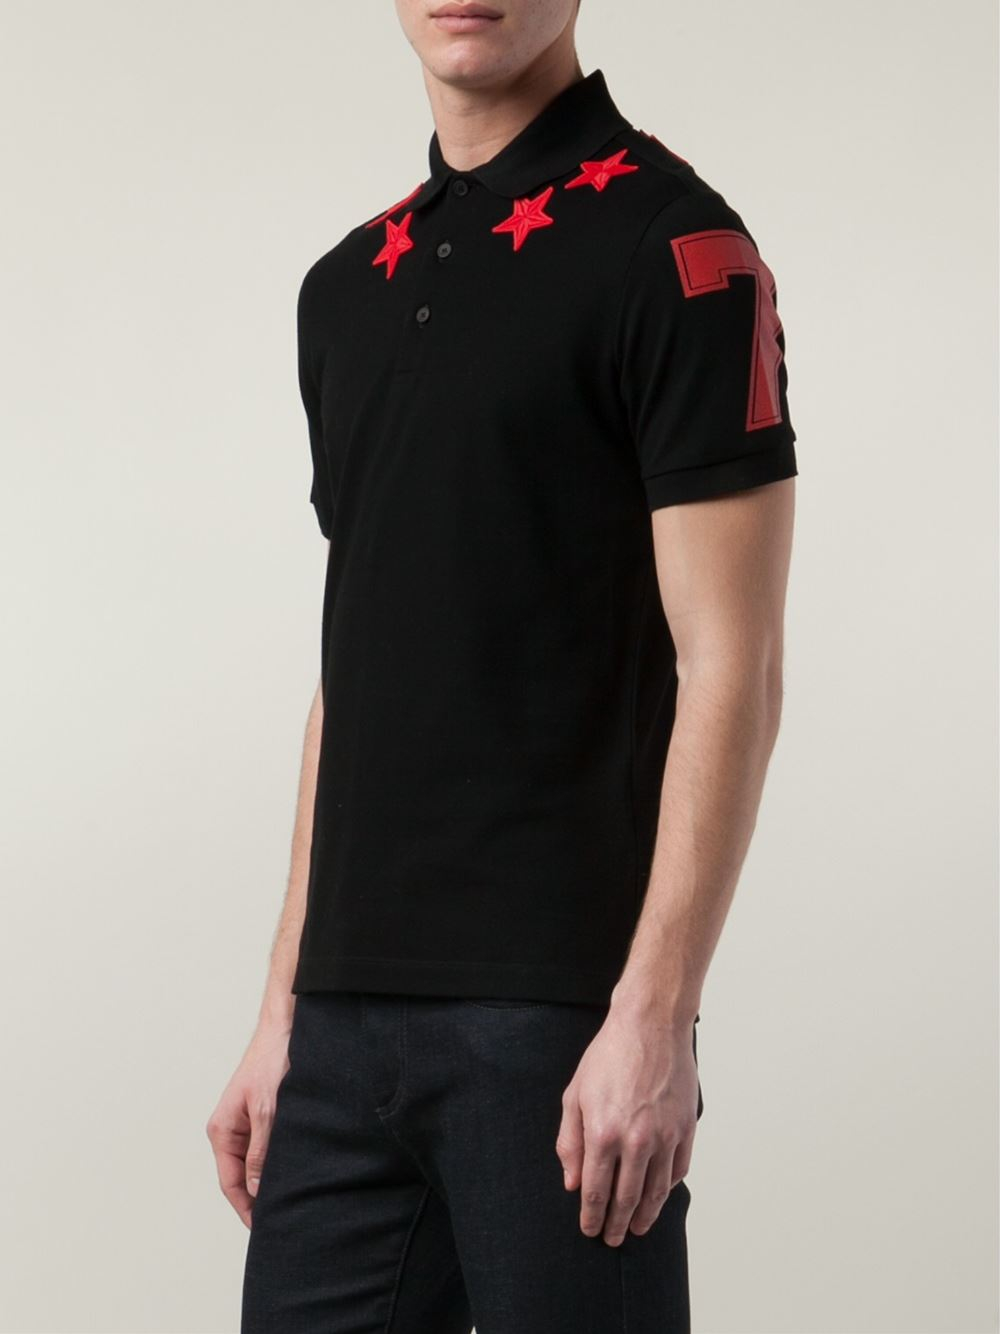 Givenchy Star Patch Polo Shirt in Black for Men - Lyst